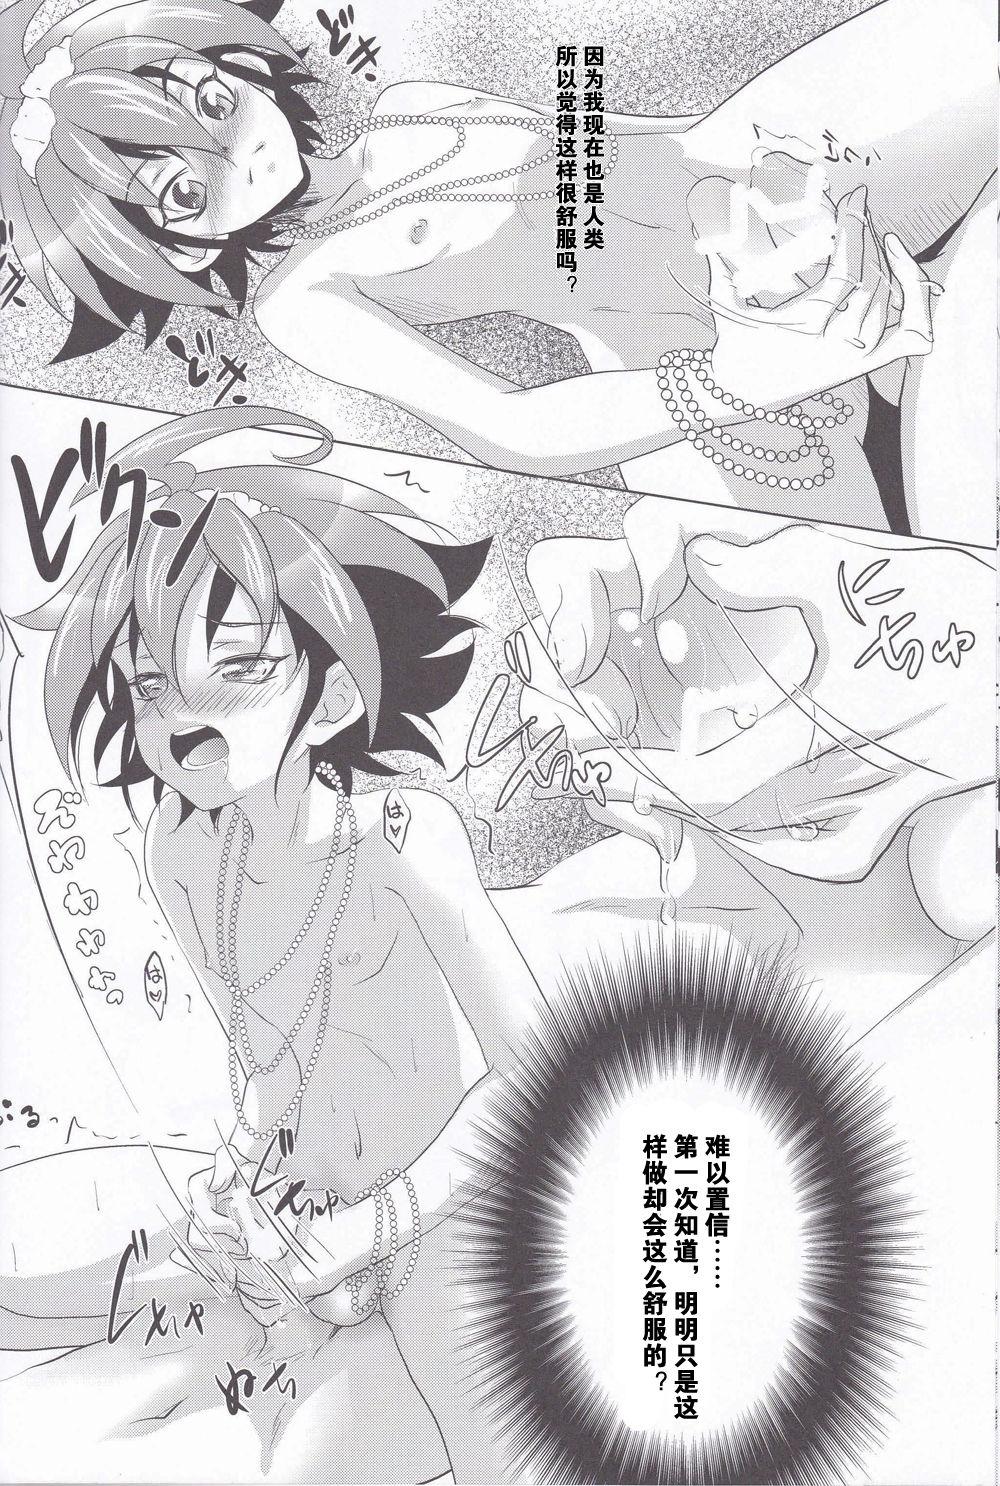 Amature Sex Mermaid Memory - Yu-gi-oh arc-v Point Of View - Page 9